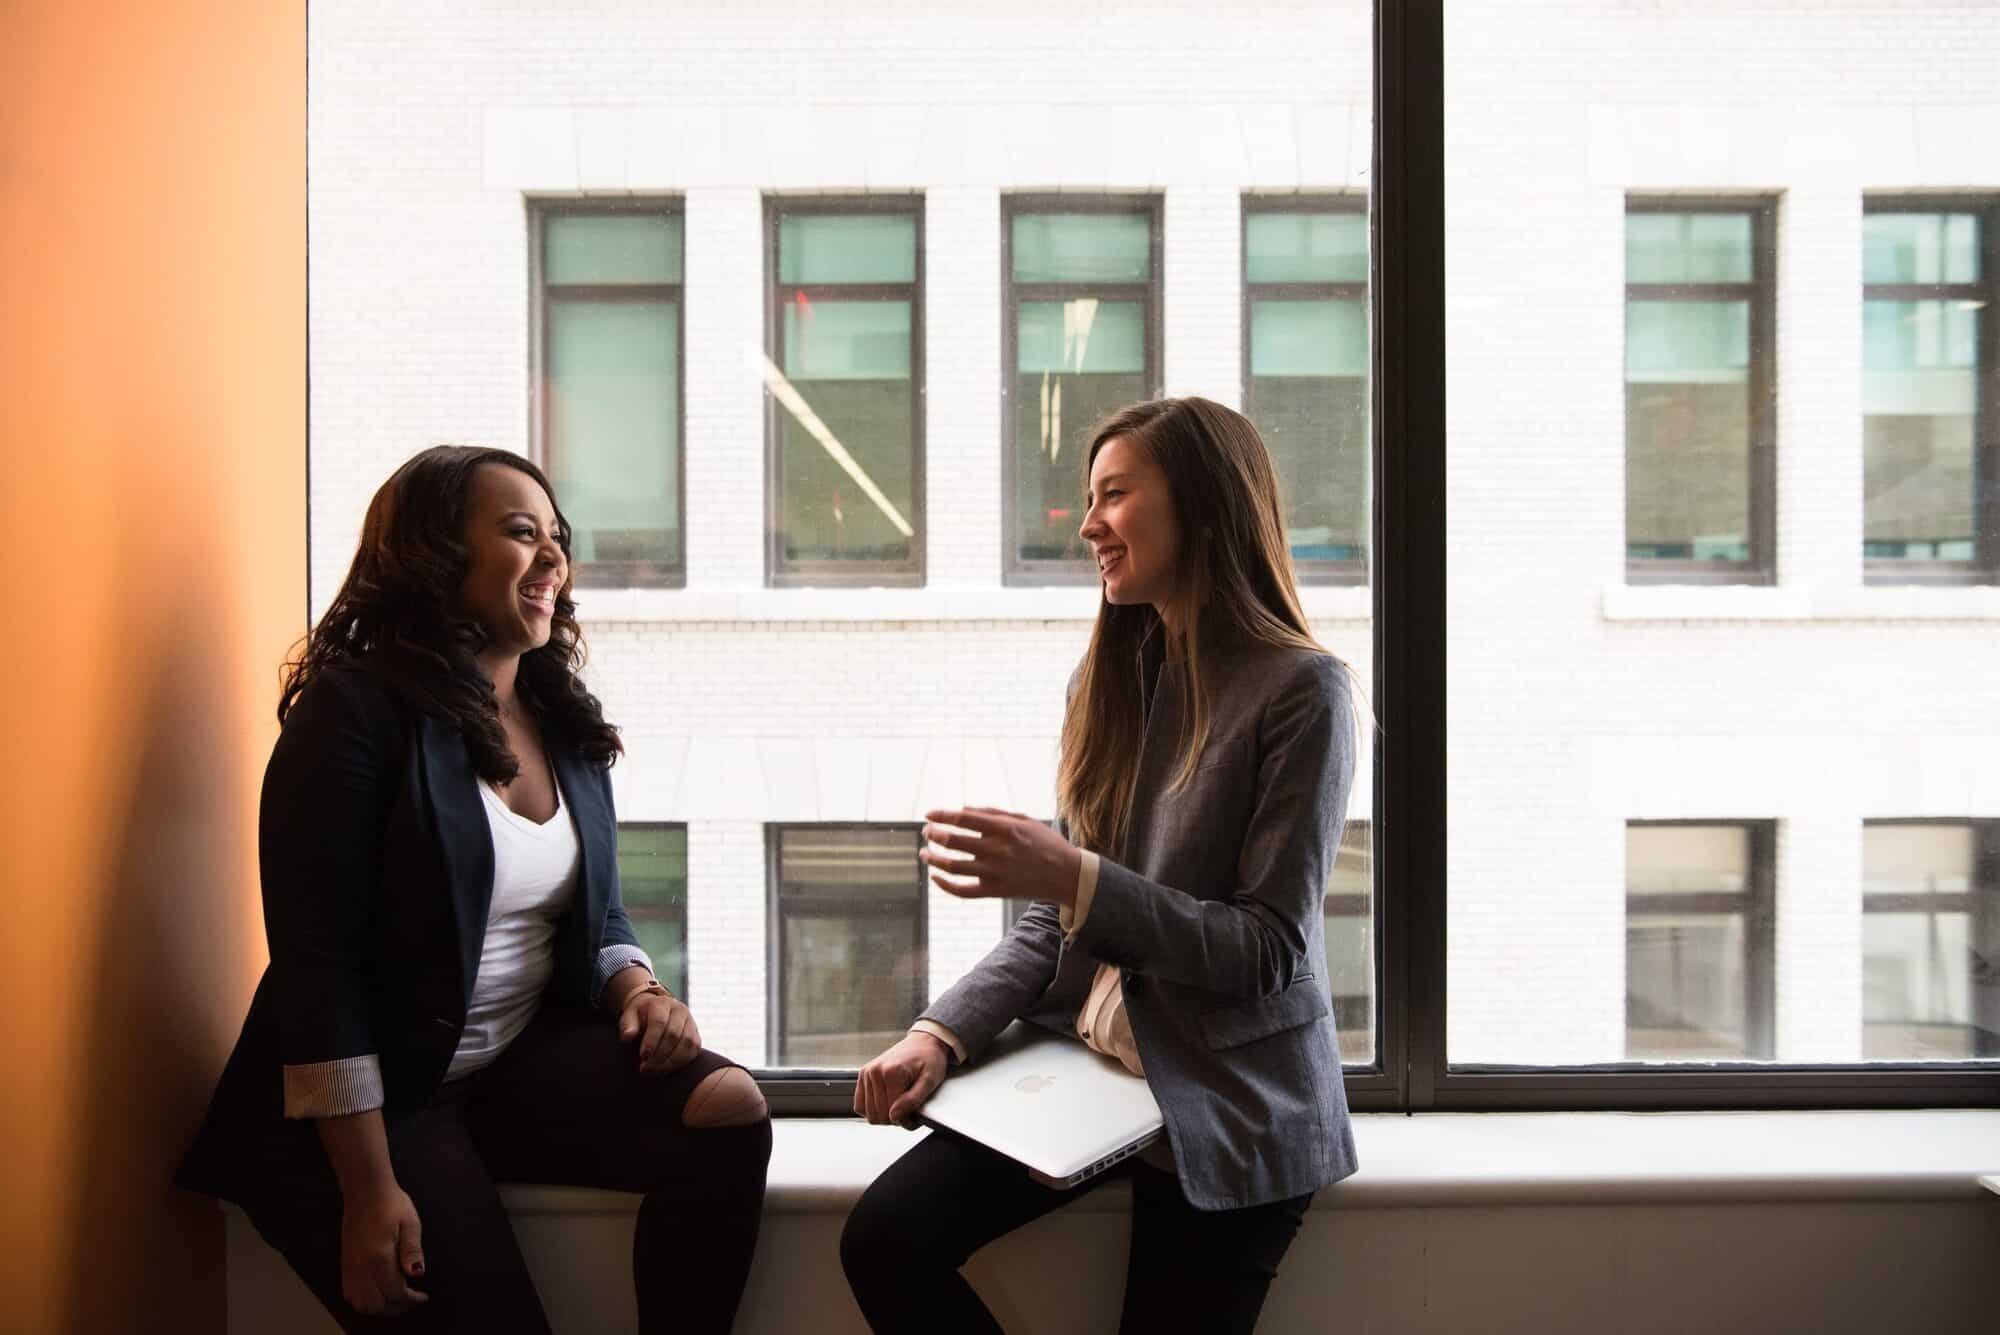 Two women in business attire sitting on a window ledge having a discussion.